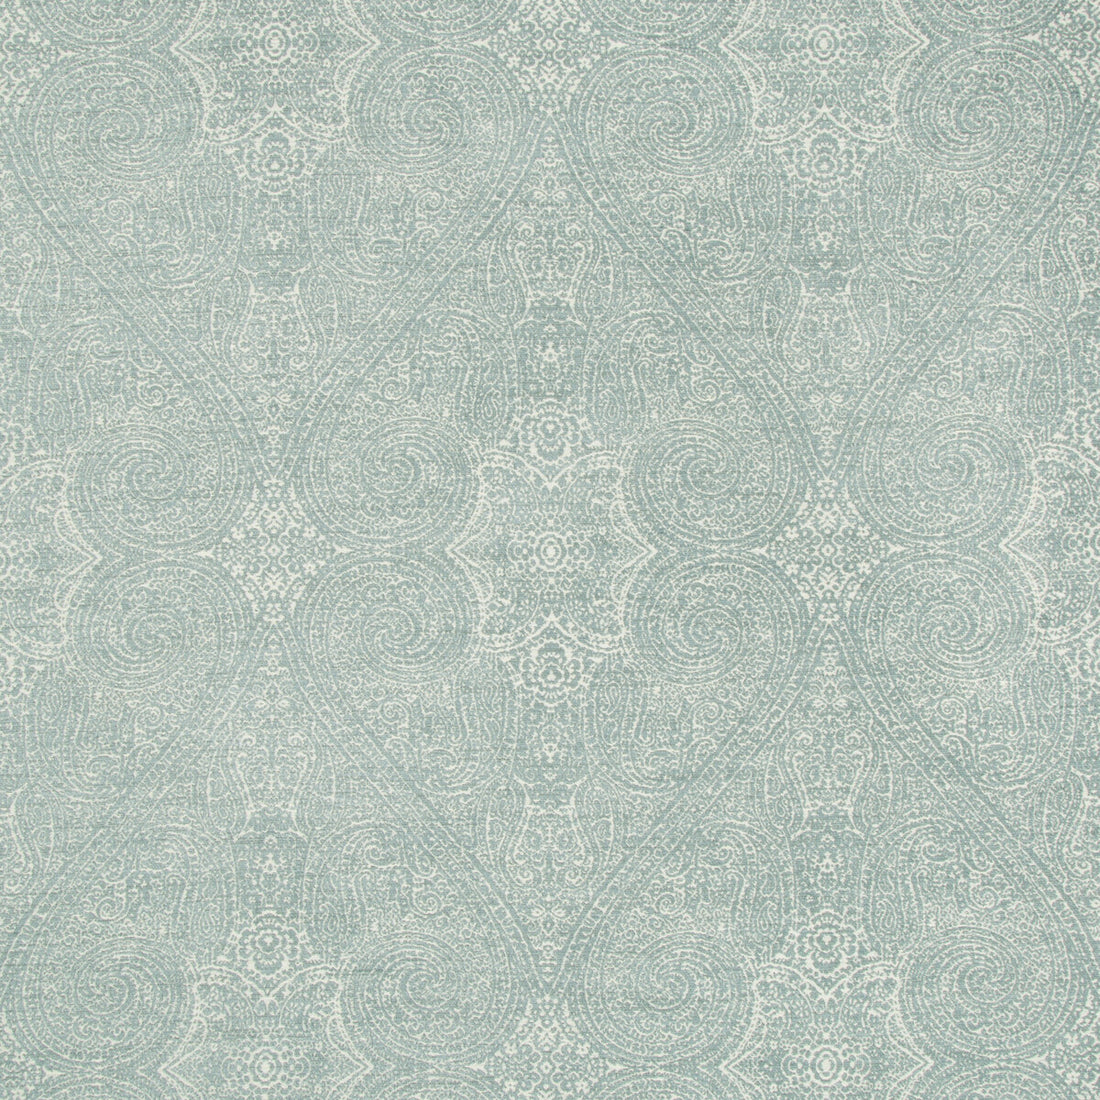 Kravet Contract fabric in 34750-15 color - pattern 34750.15.0 - by Kravet Contract in the Gis collection